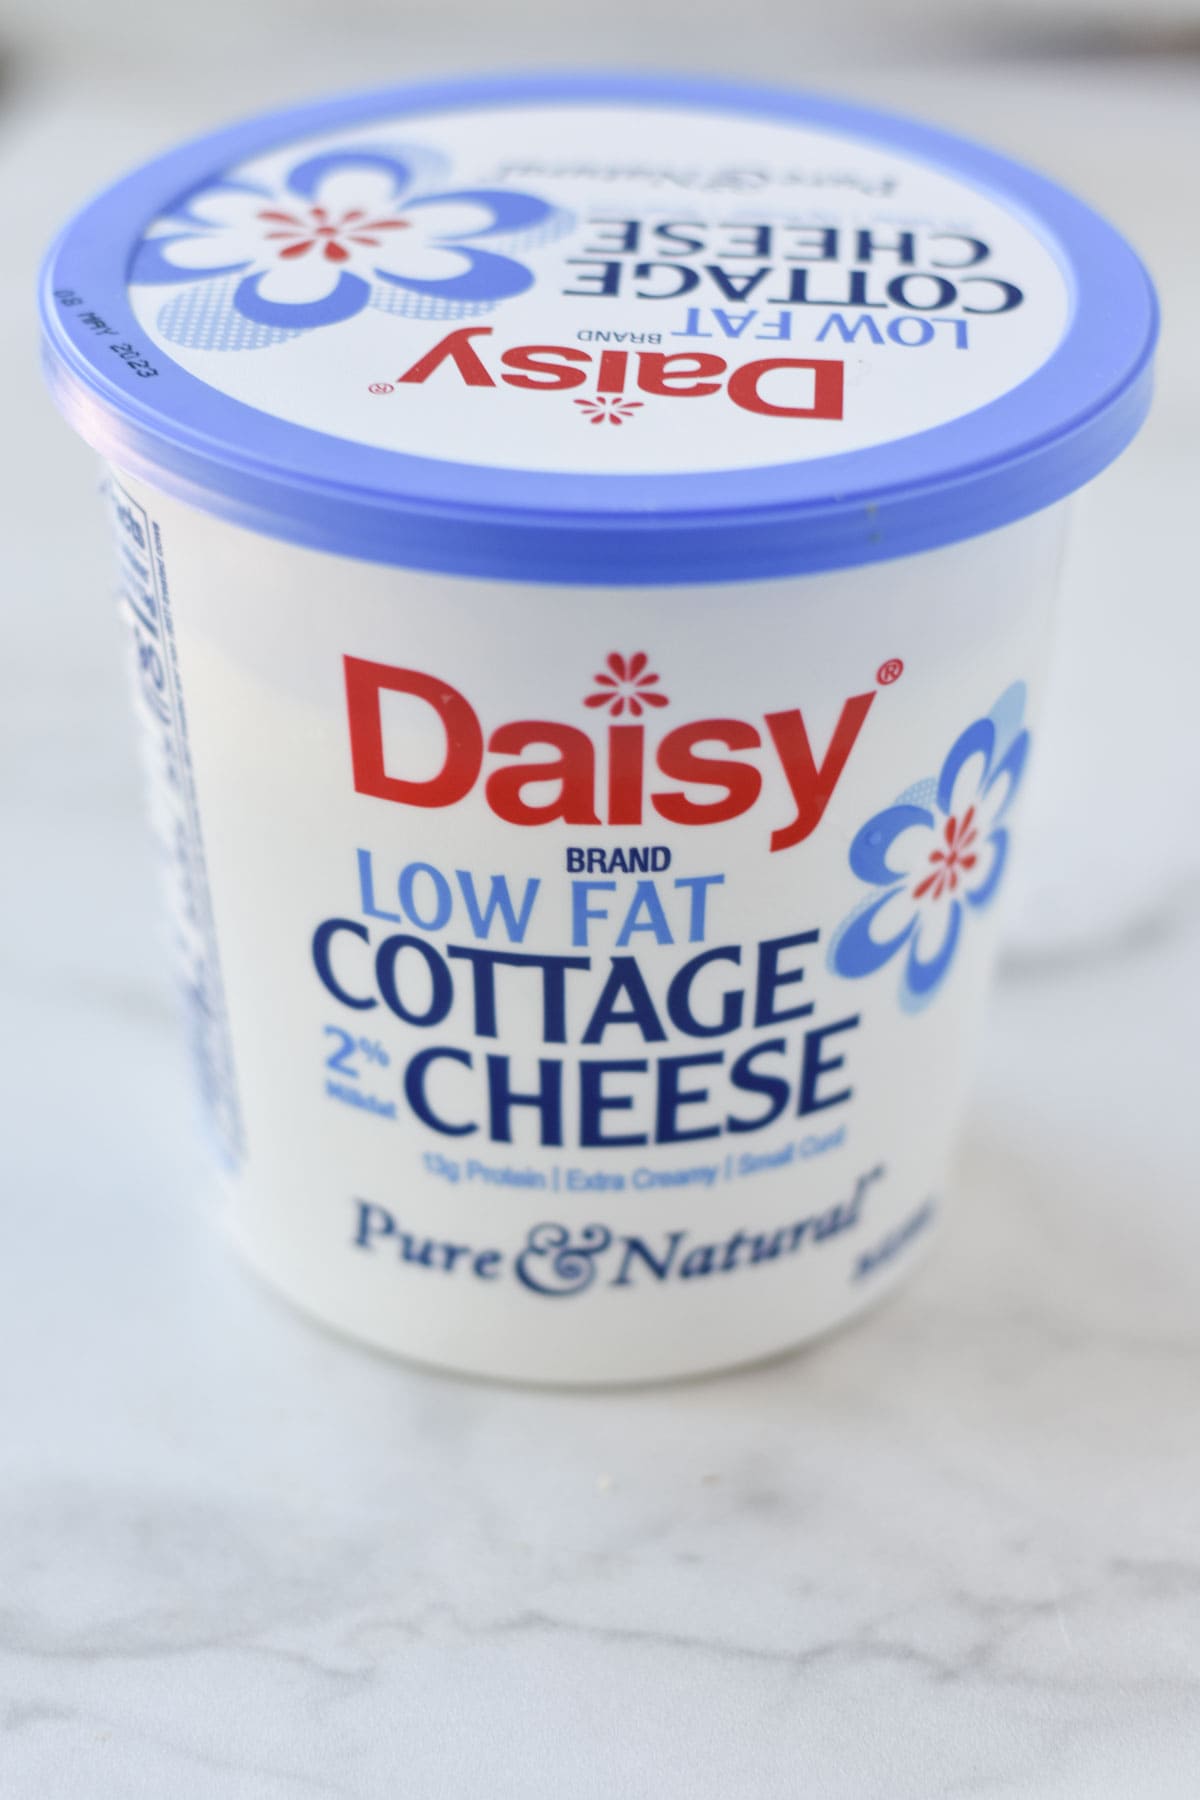 Low fat daisy cottage cheese on a marble table.